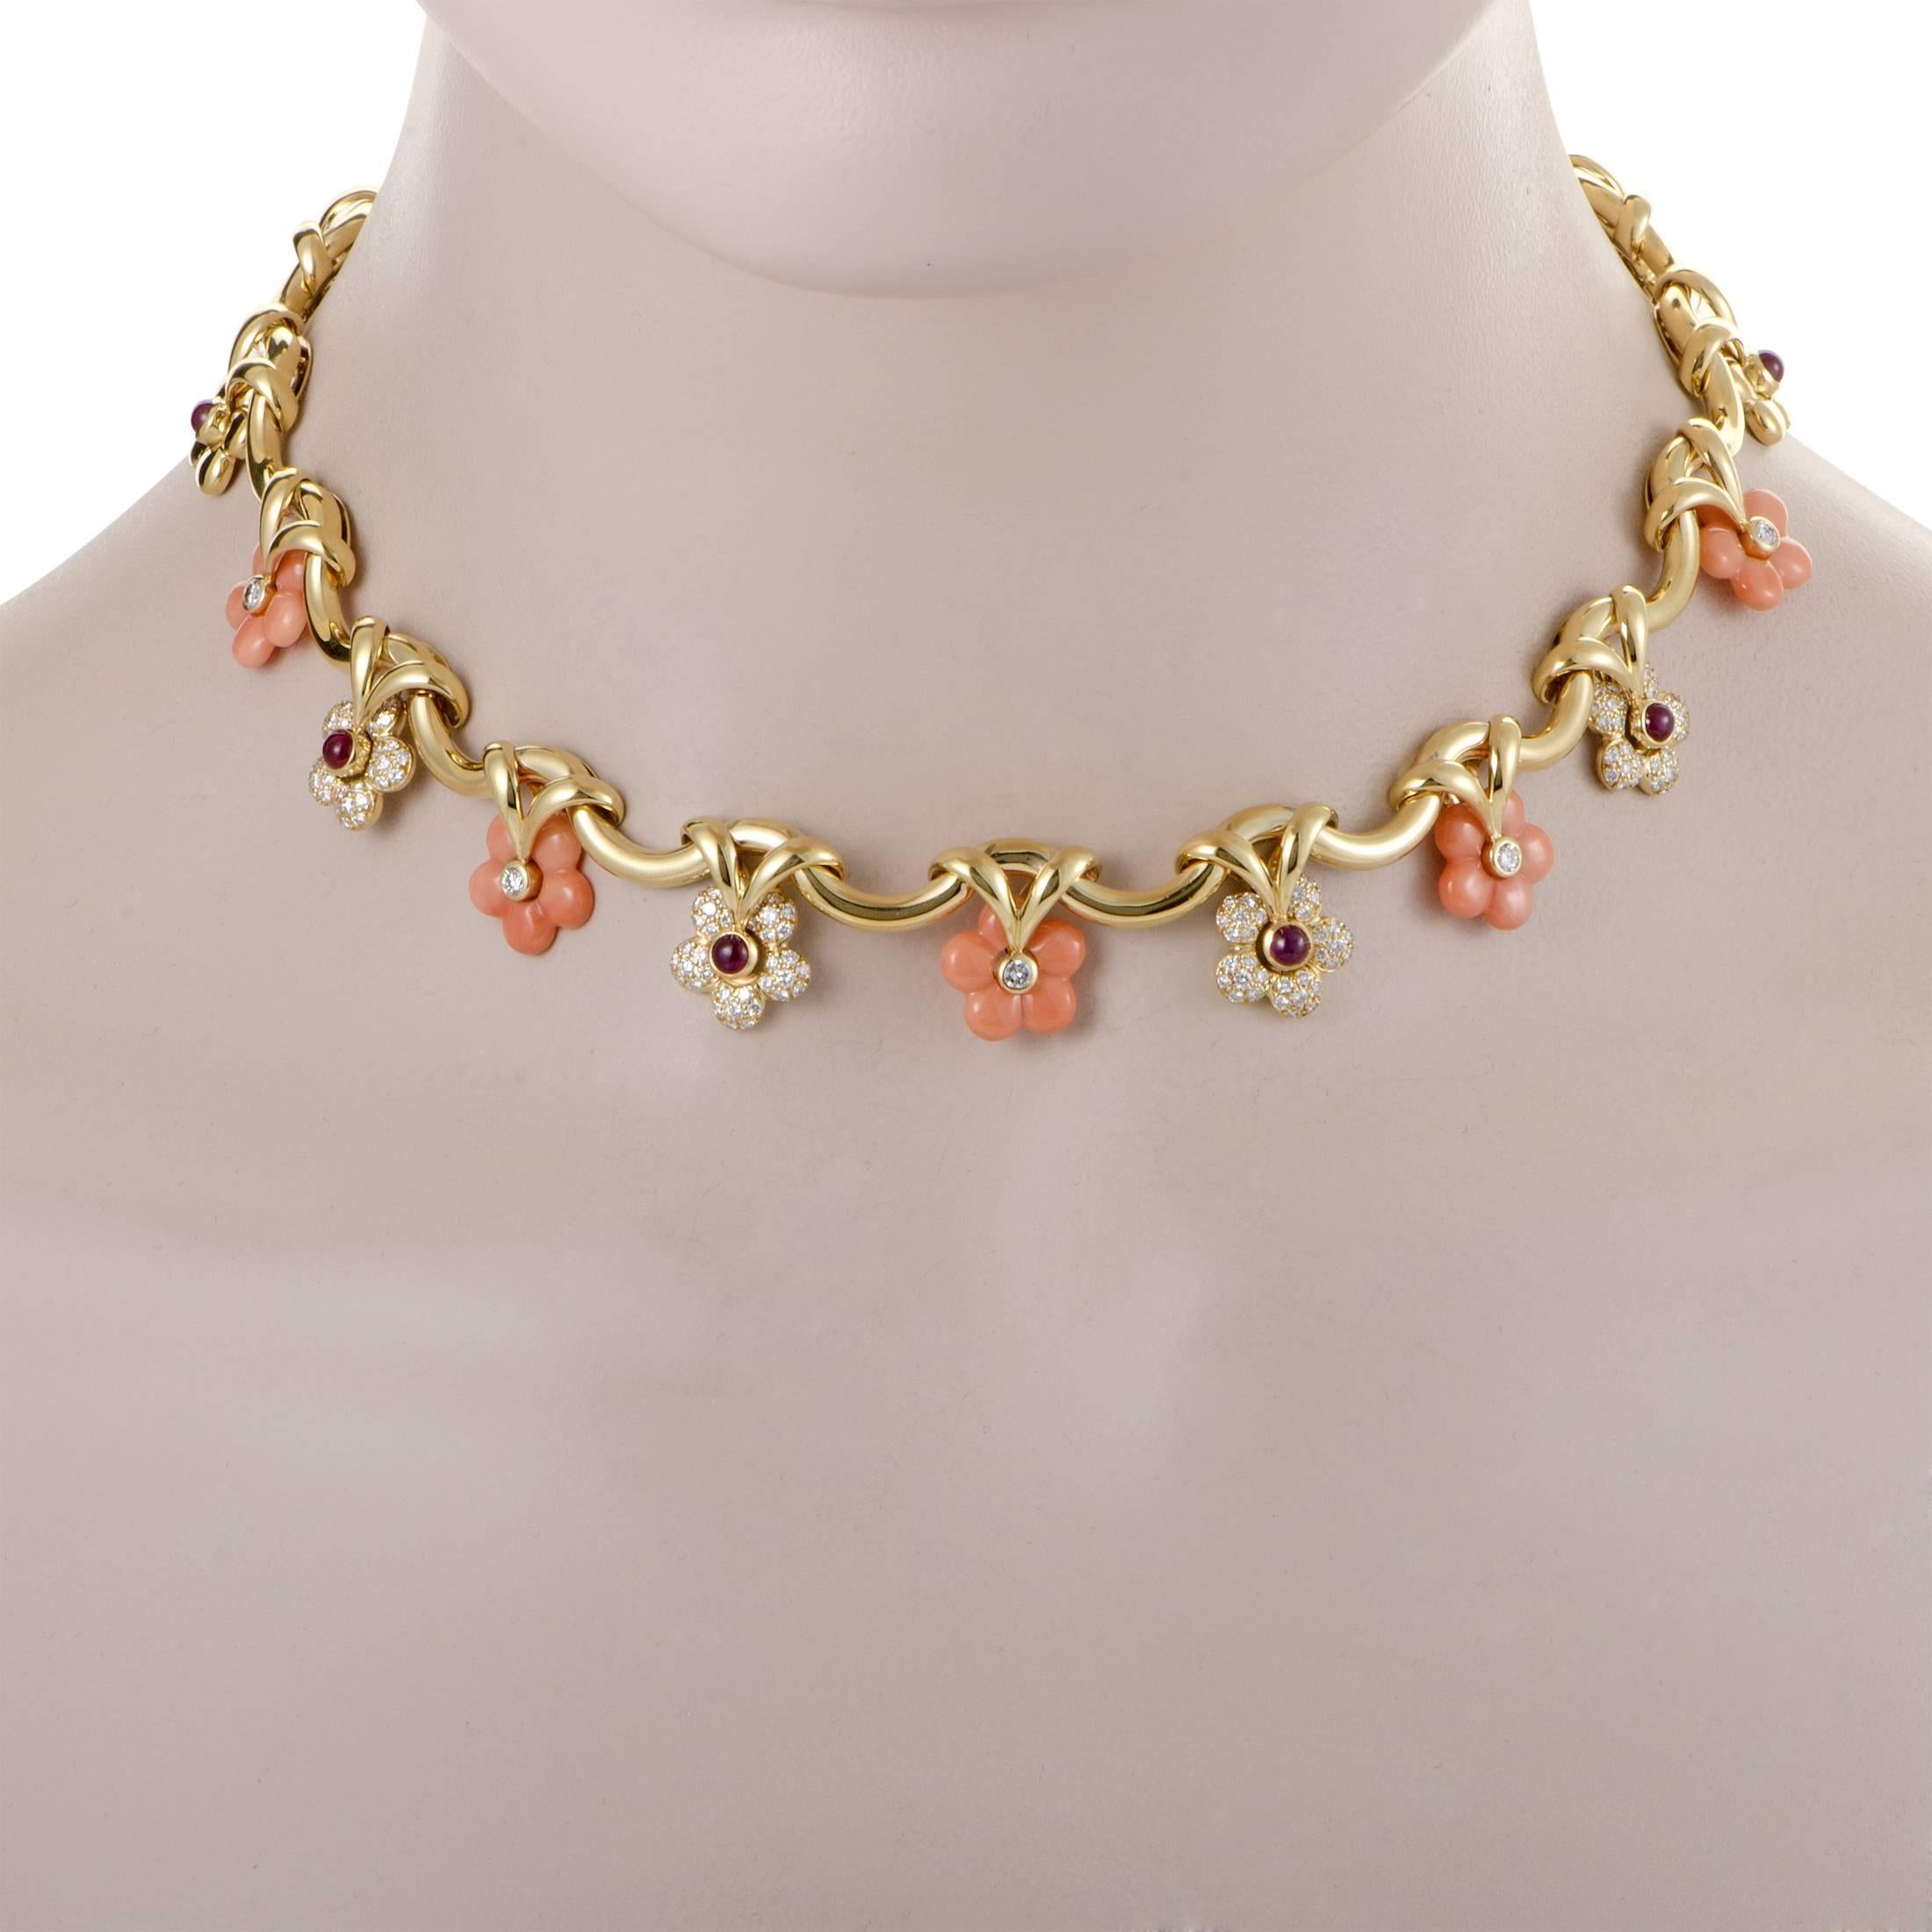 Producing a delightfully feminine tone by combining tender coral stone and fabulous rubies totaling 3.54 carats, this gorgeous 18K yellow gold necklace is also embellished with 2.39 carats of scintillating diamonds.